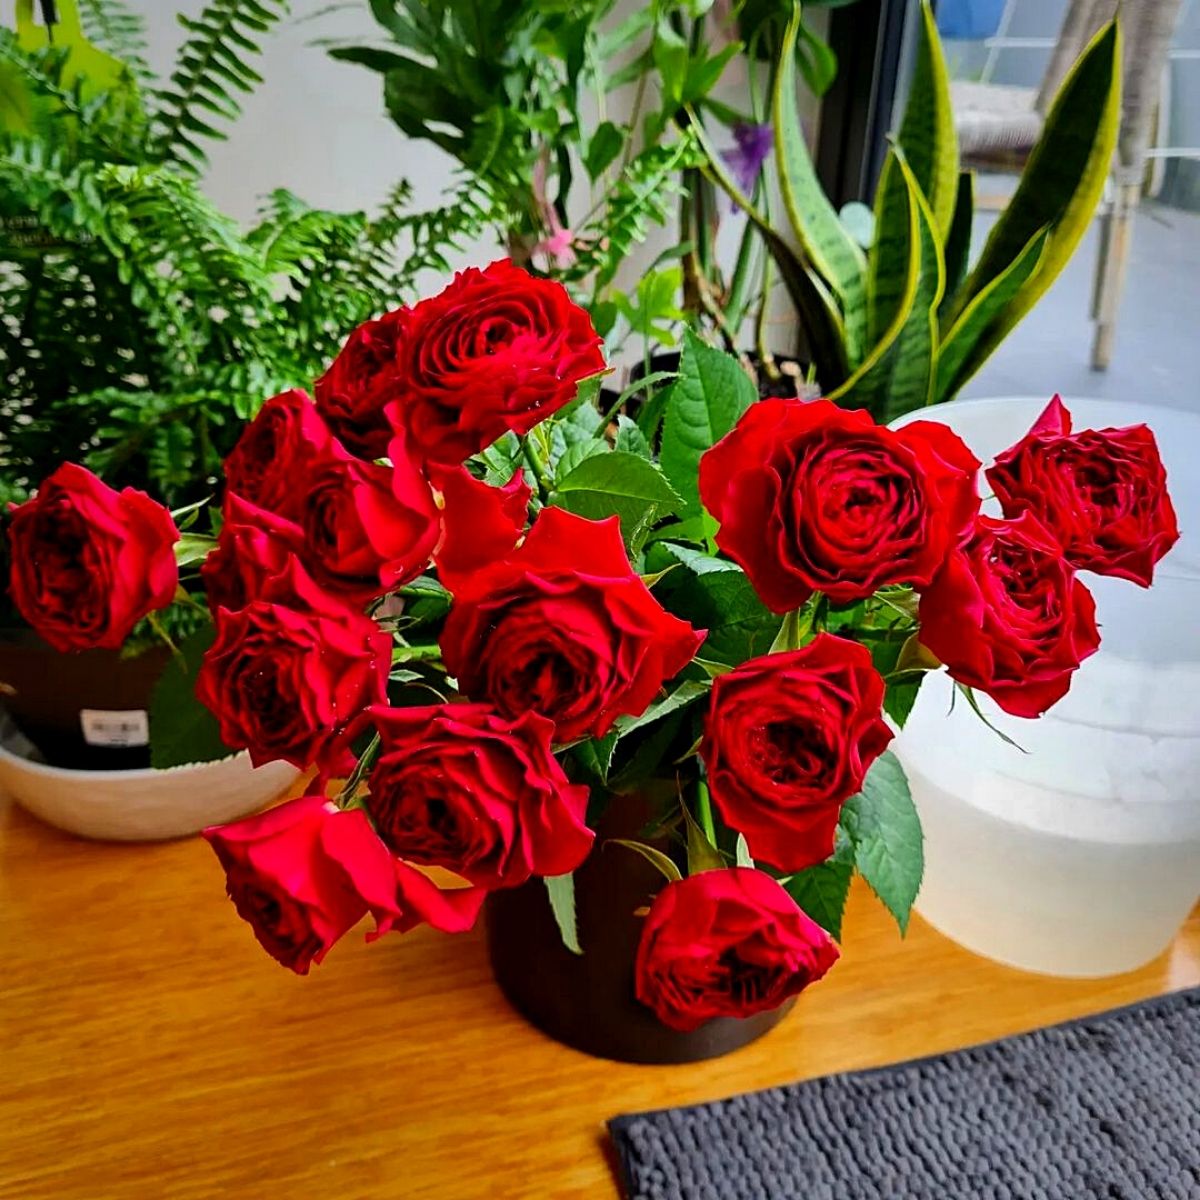 Red roses are a celebration of National Red Rose Day